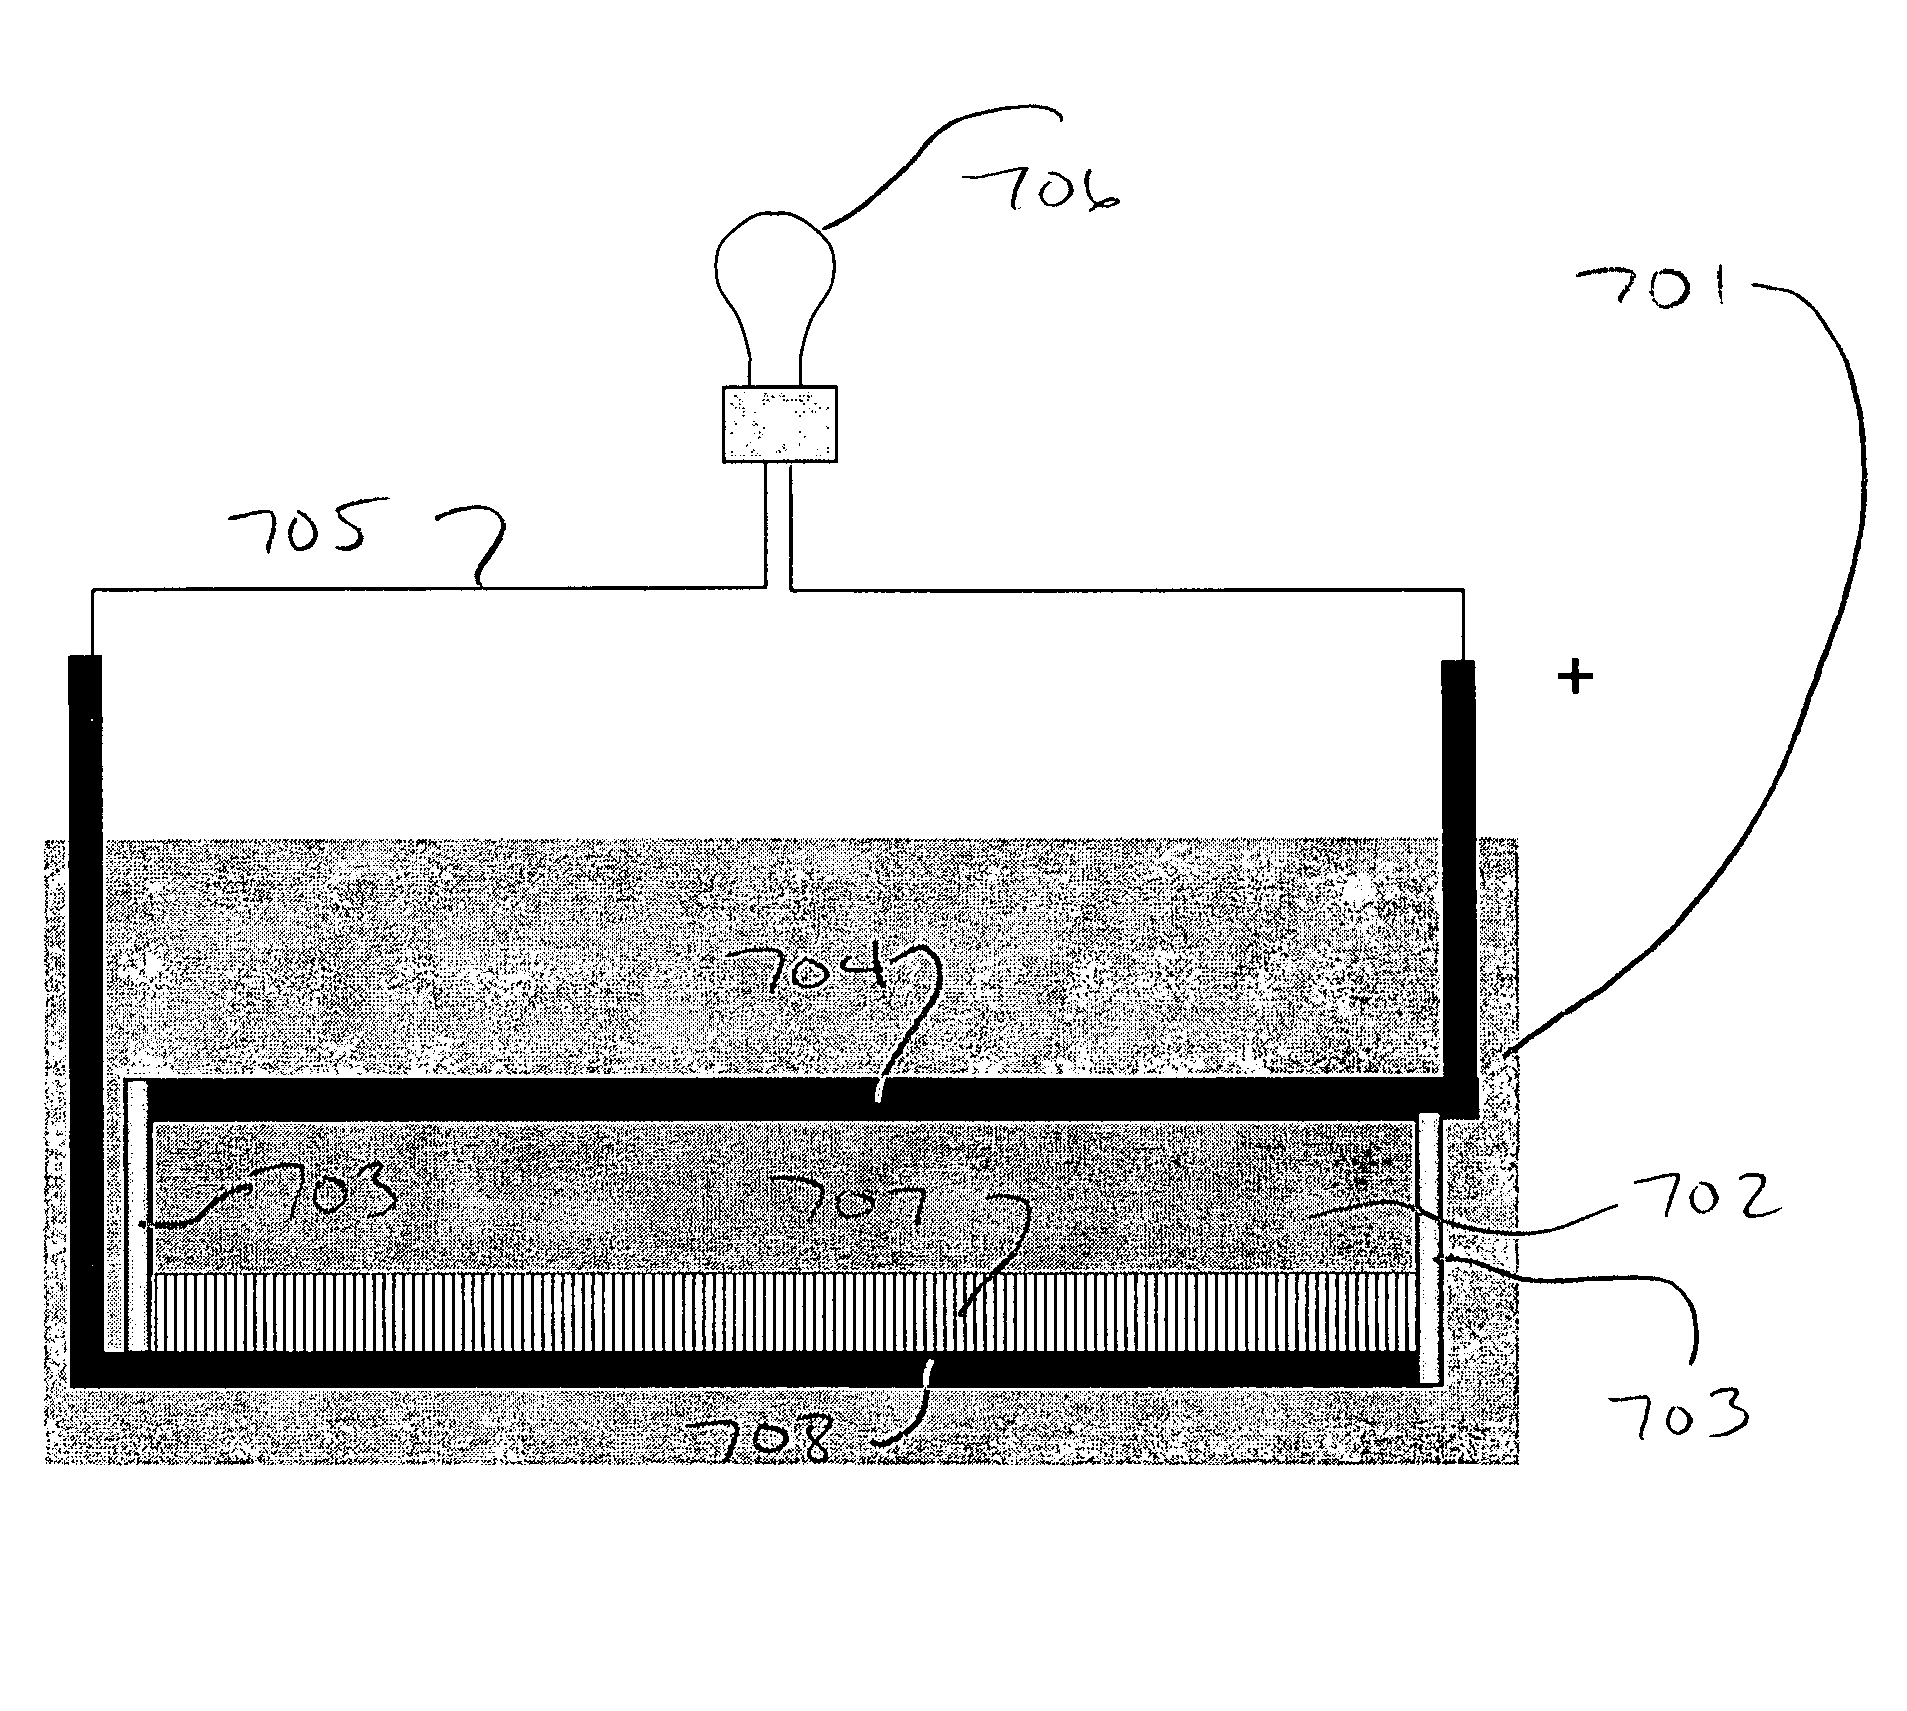 Electrowetting battery having a nanostructured electrode surface